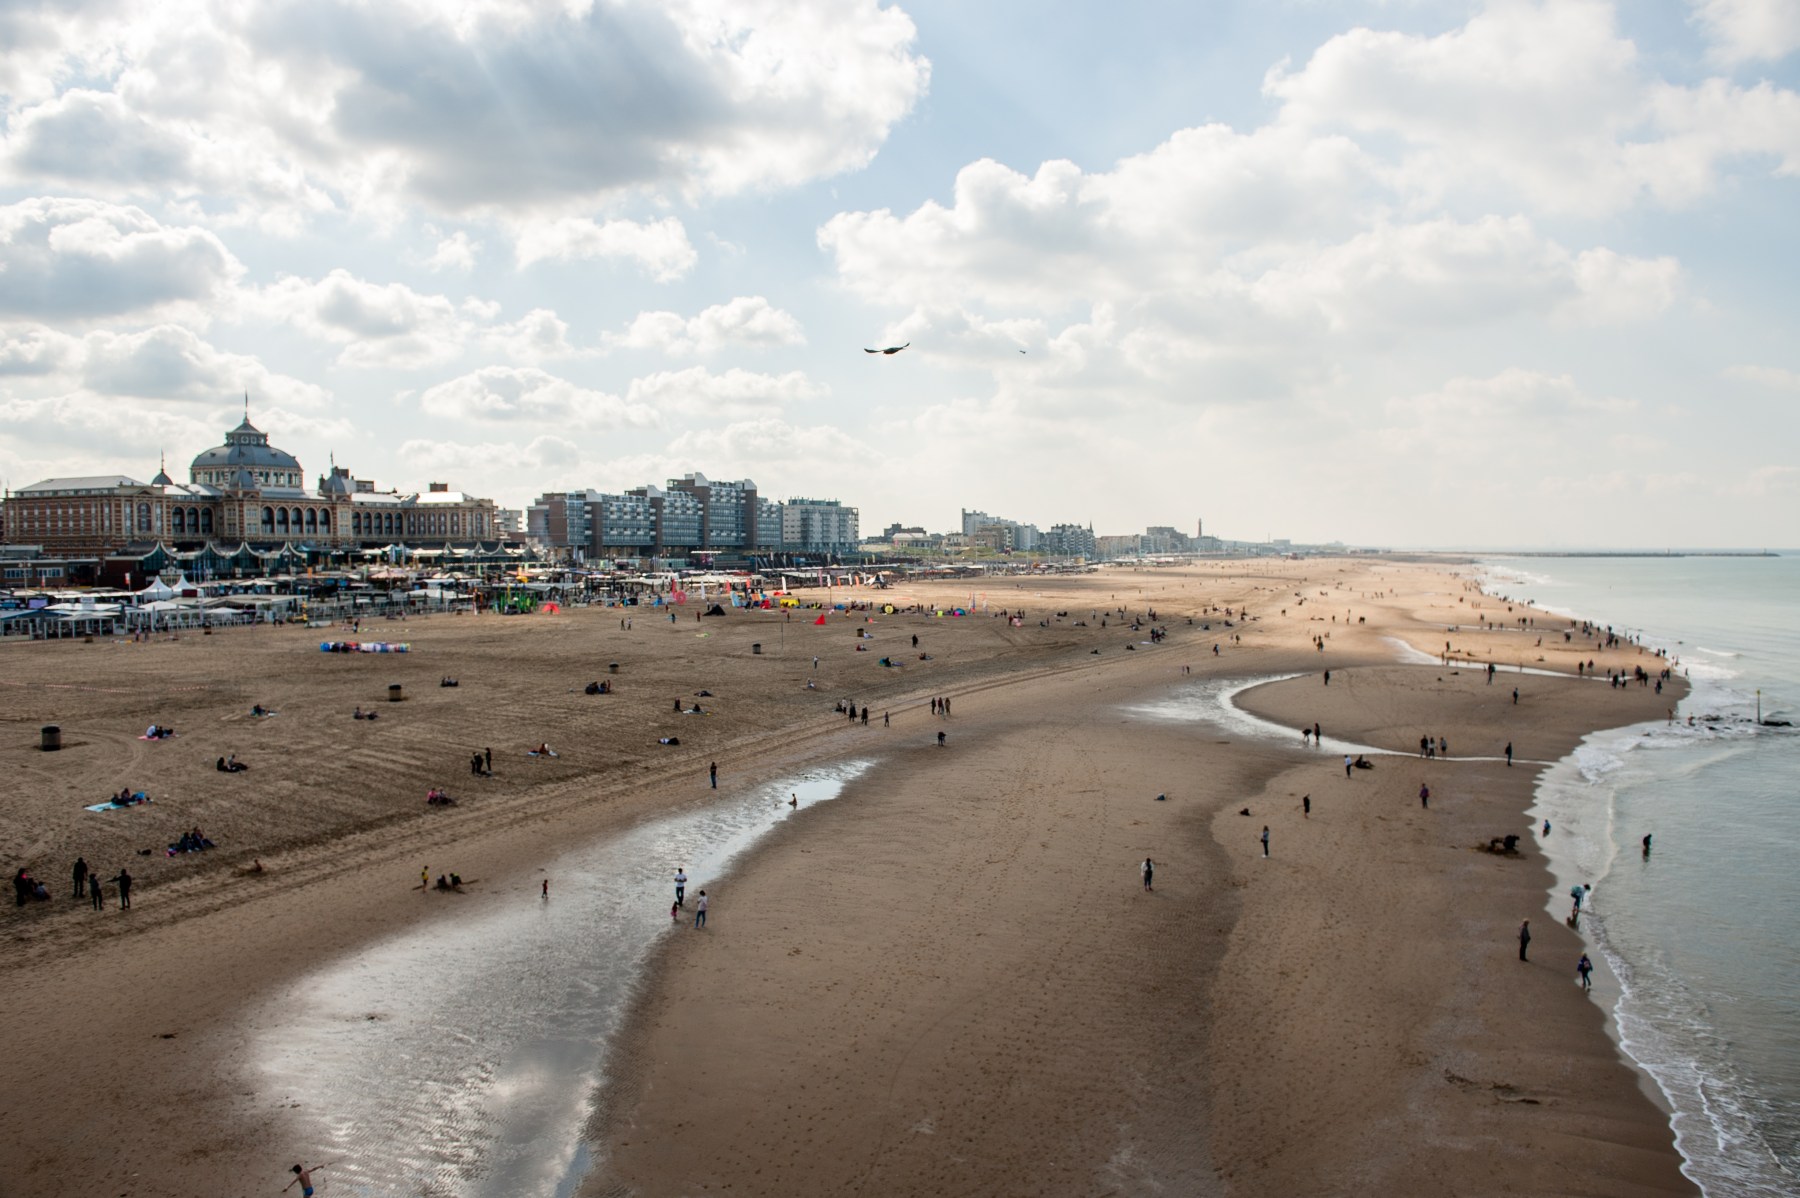 This Beach in the Netherlands Is Having a Year-Long Party - InsideHook